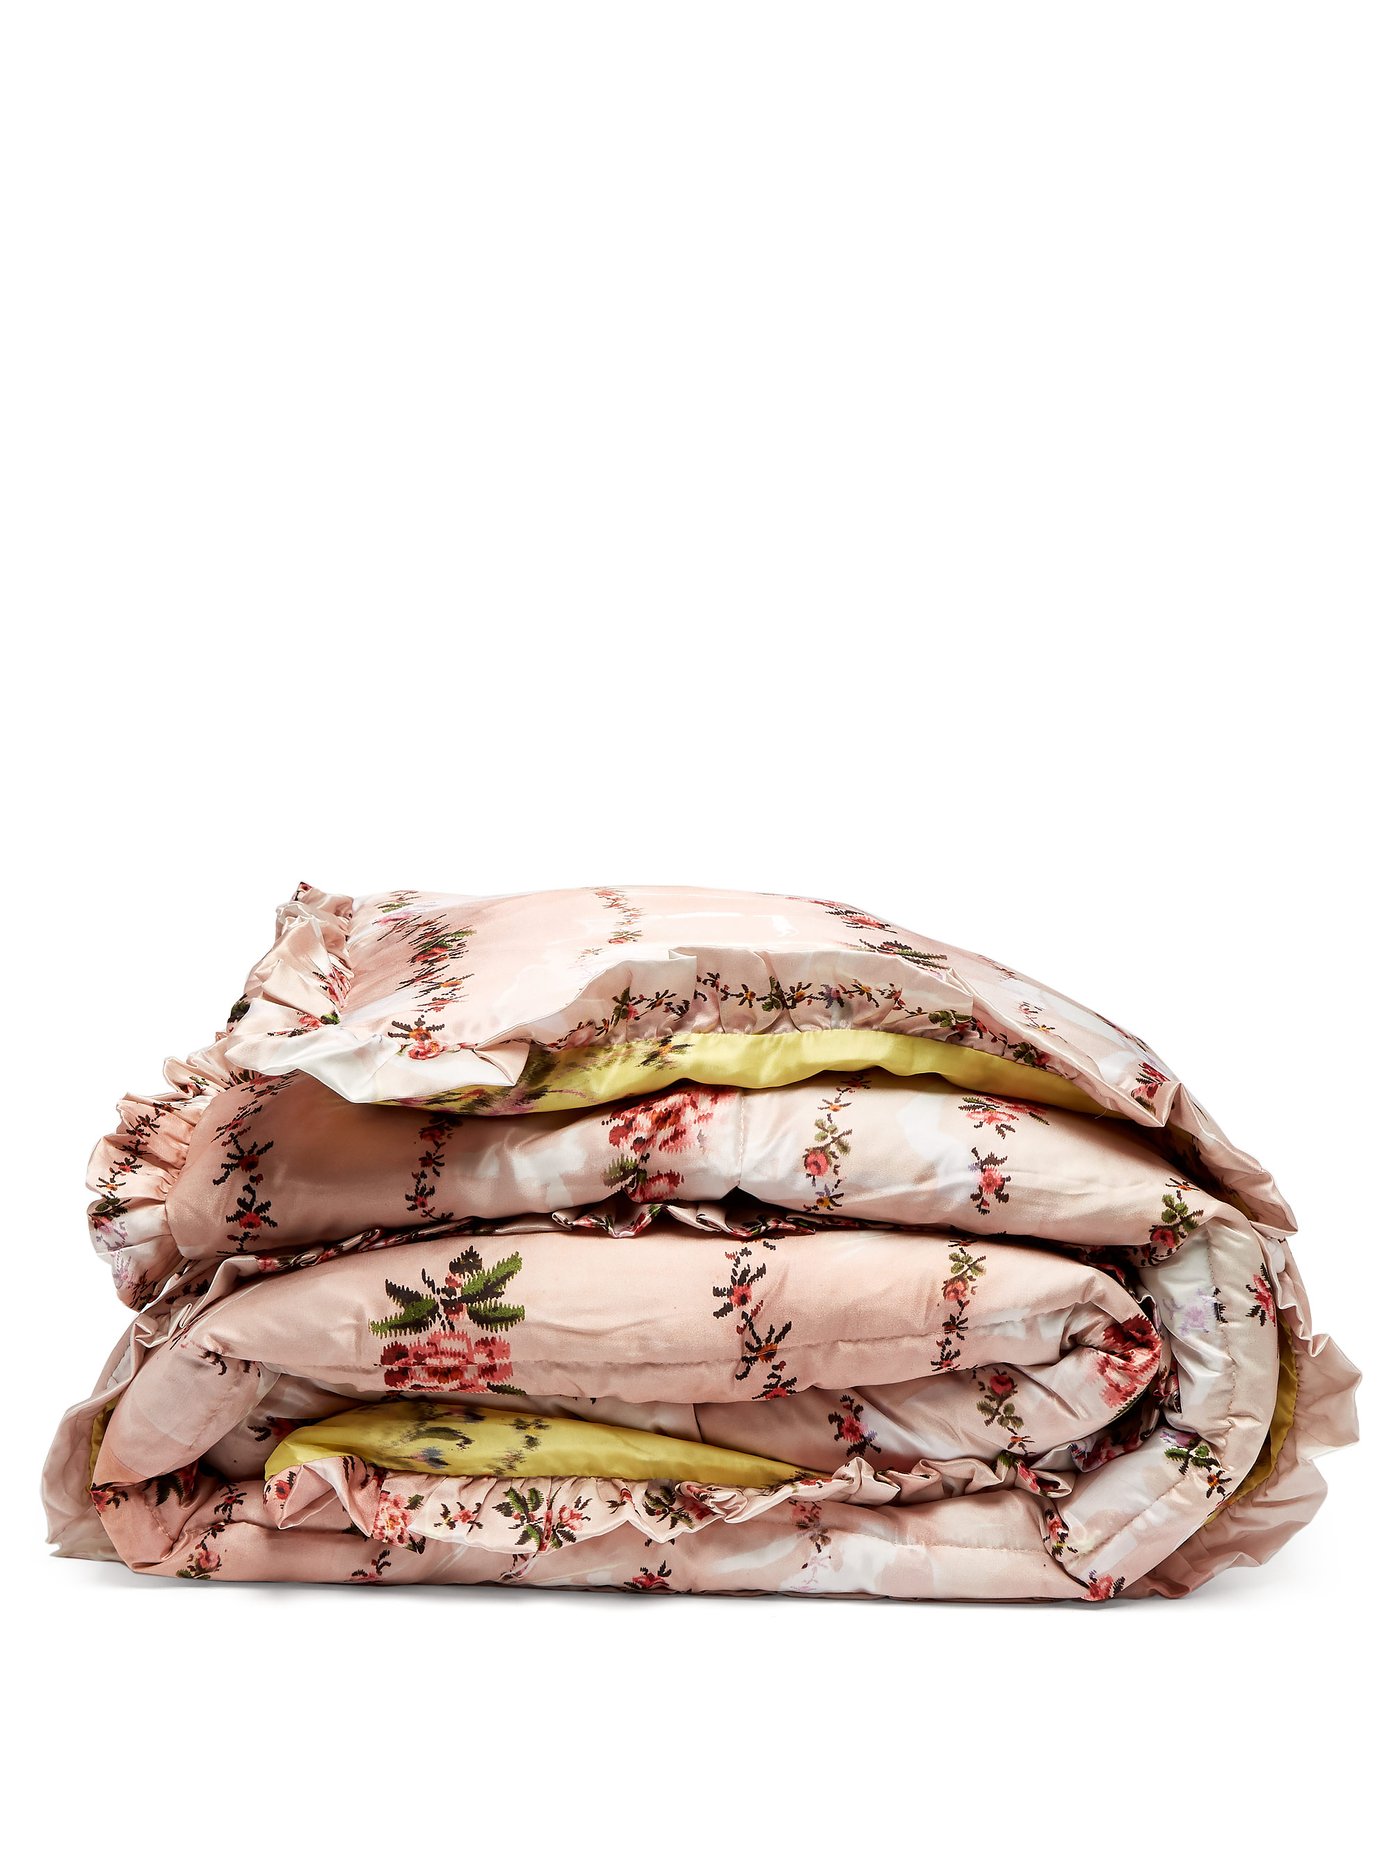 King Quilted Floral Print Satin Eiderdown Preen By Thornton